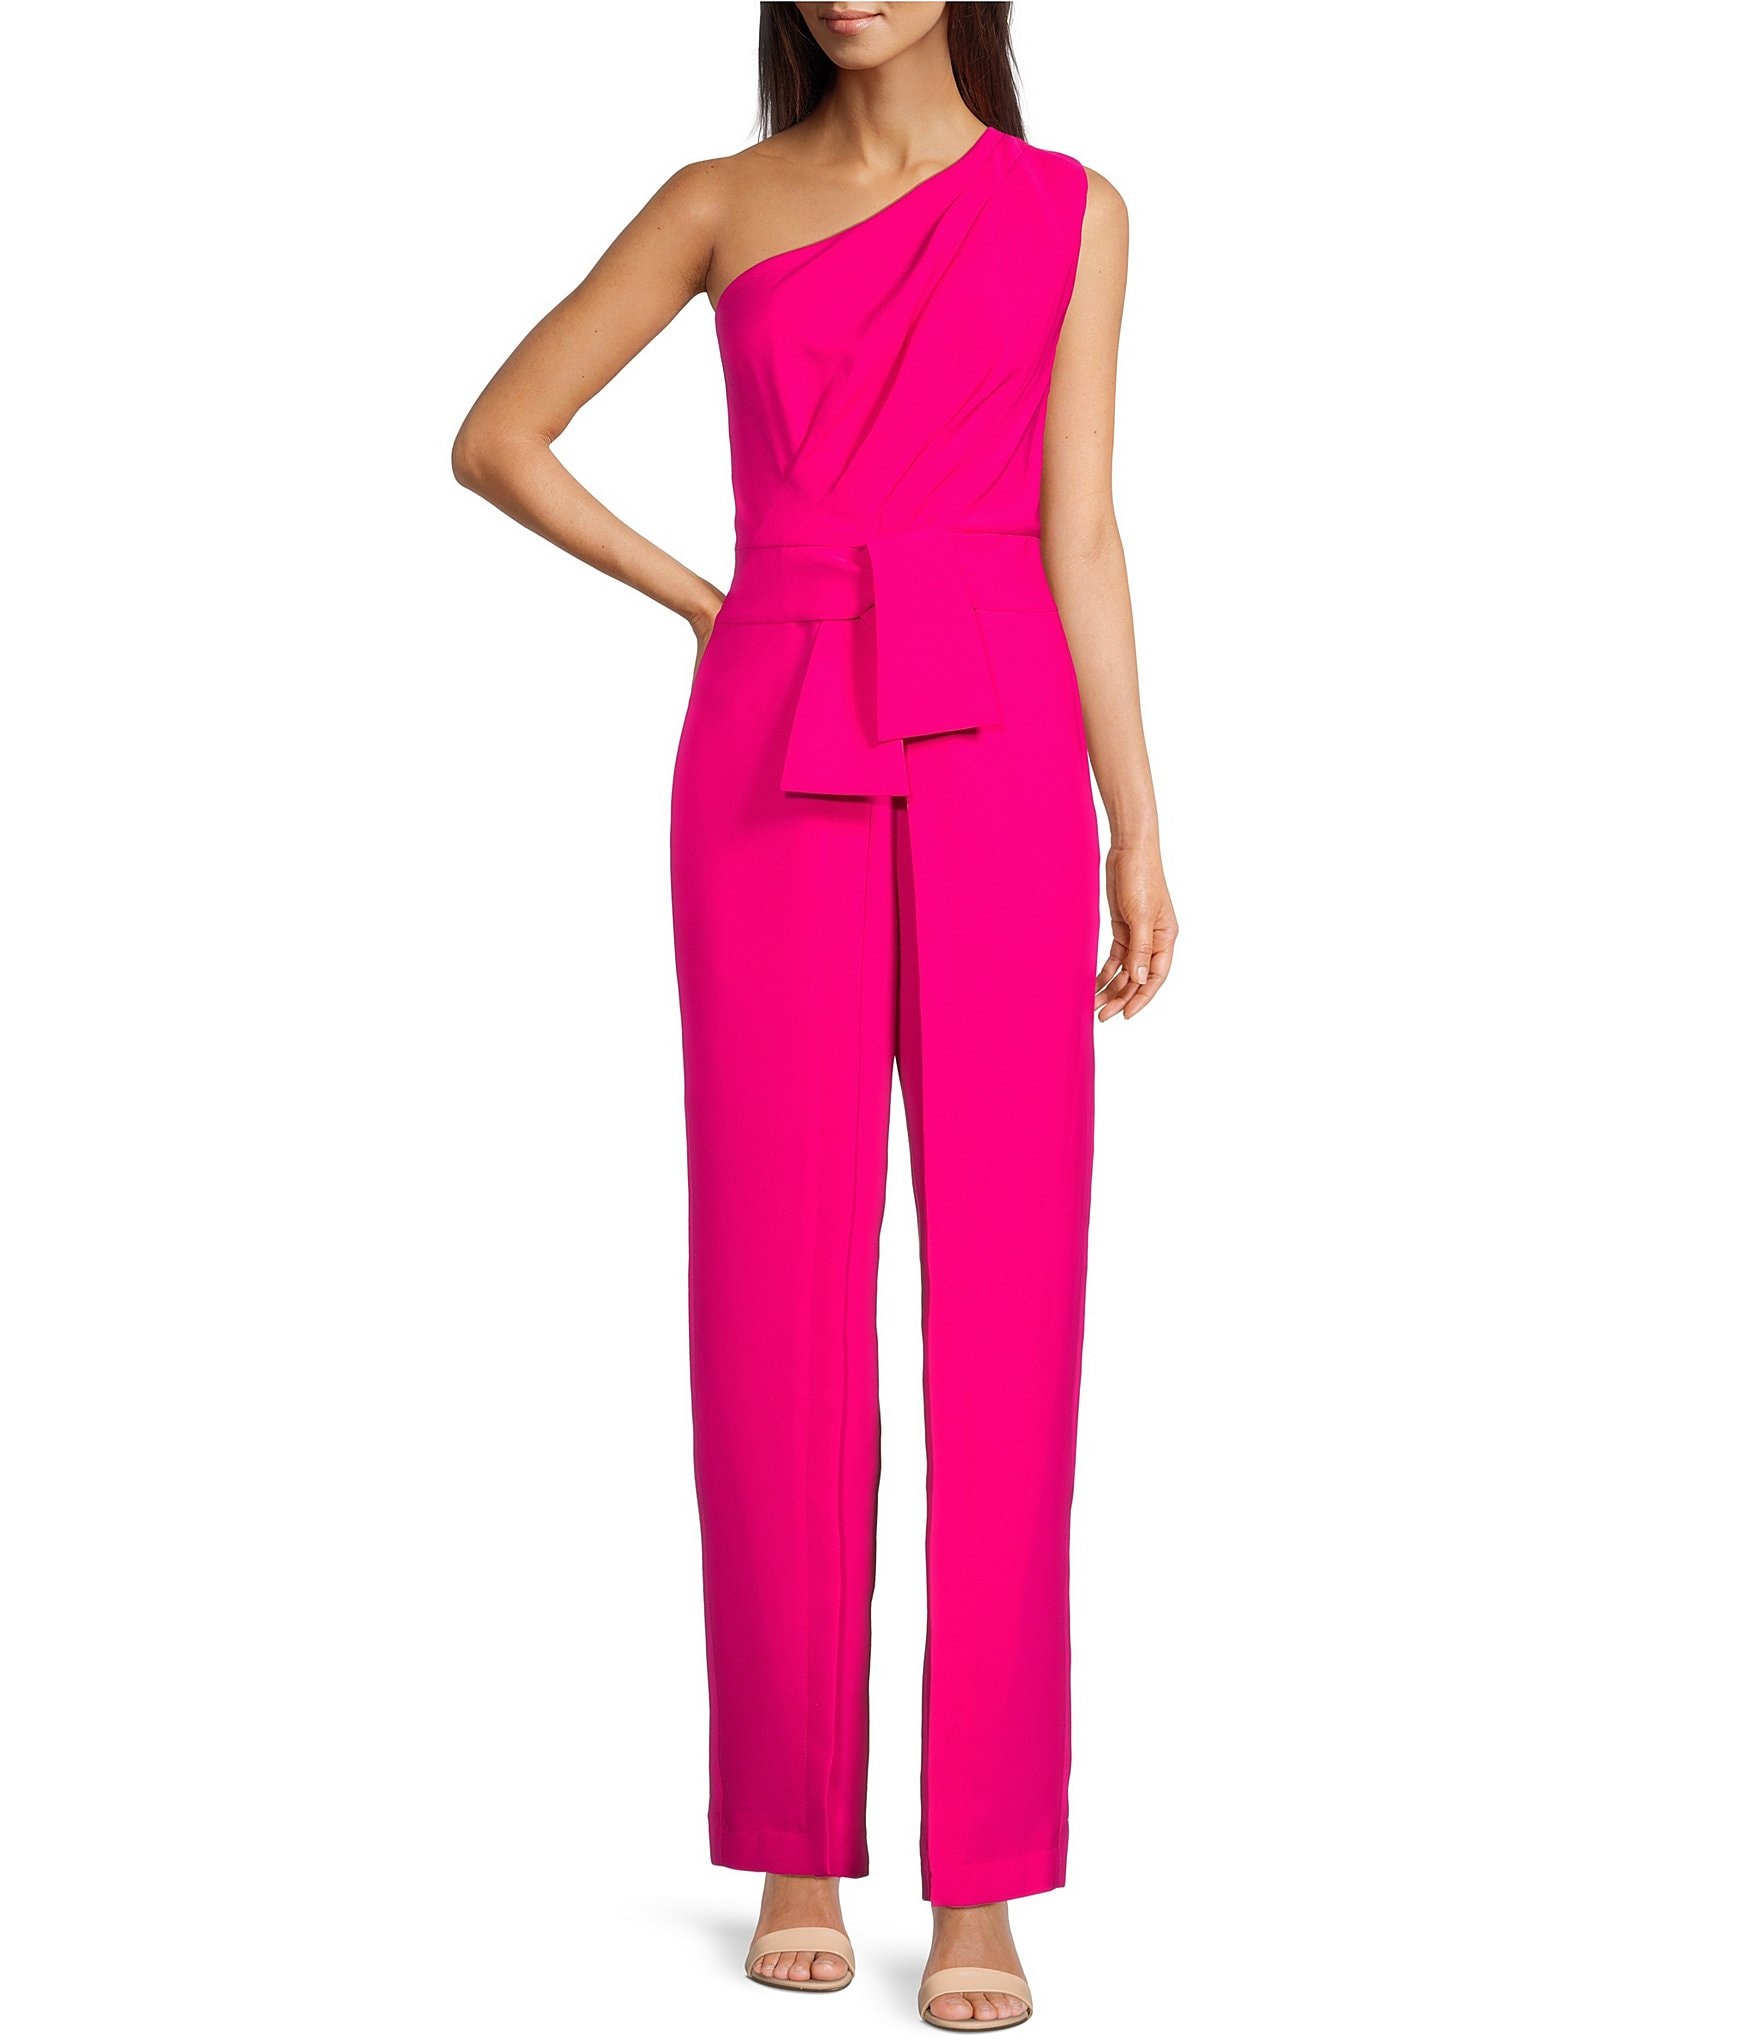 Alex Marie Flutter Sleeve Wide Leg Jumpsuit w/ Pockets Coral Pink, Size 12  | Wide leg jumpsuit, Jumpsuit with sleeves, Short sleeve jumpsuits